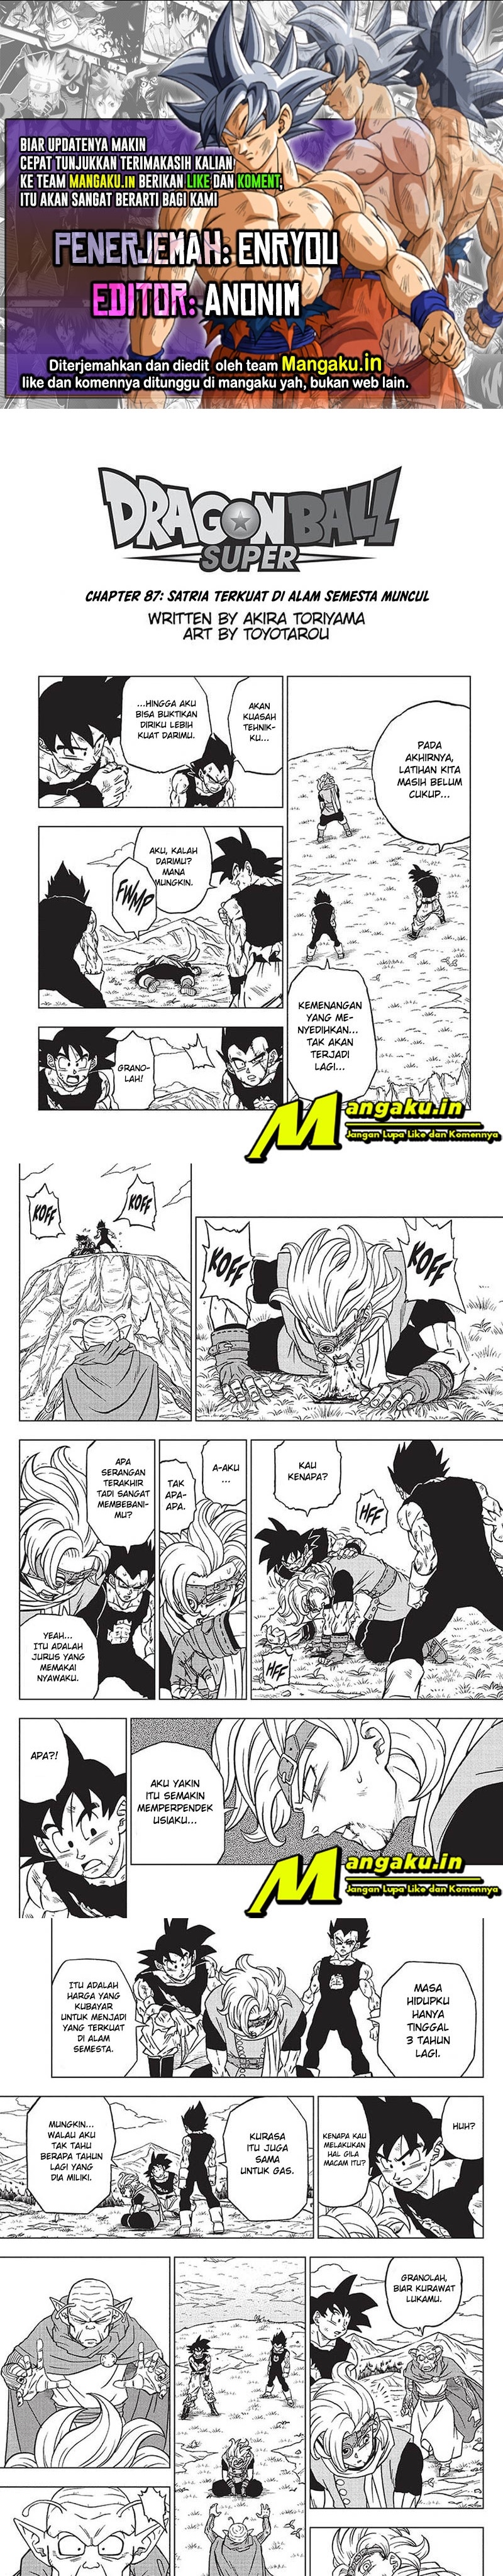 Dragon Ball Super: Chapter 87.1 - Page 1